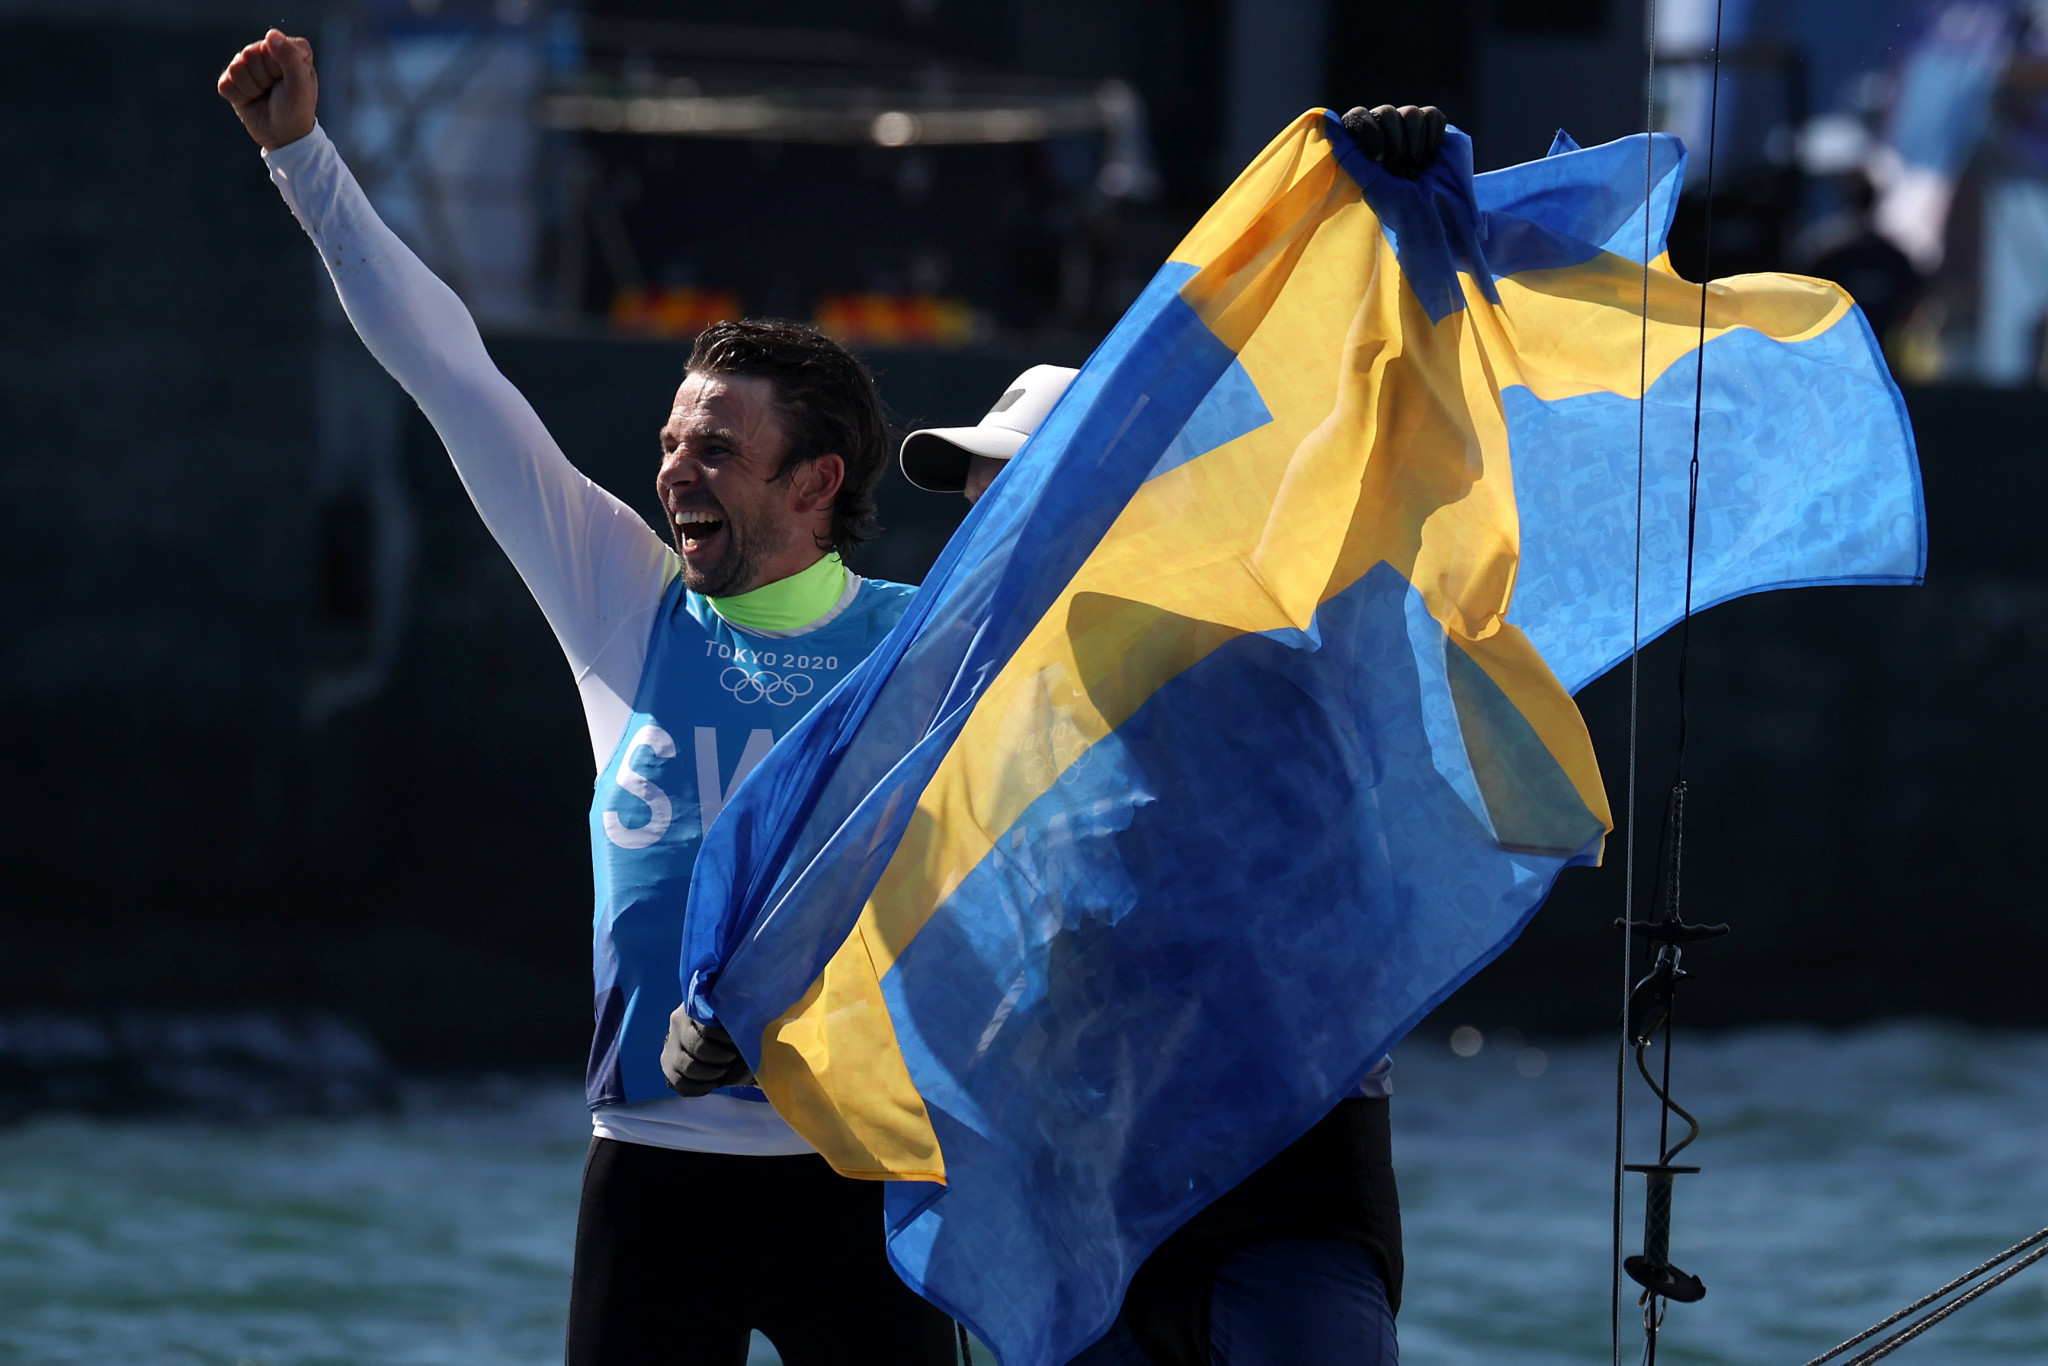 Anton Dahlberg will be a contender for Sweden in Sdot Yam ©Getty Images